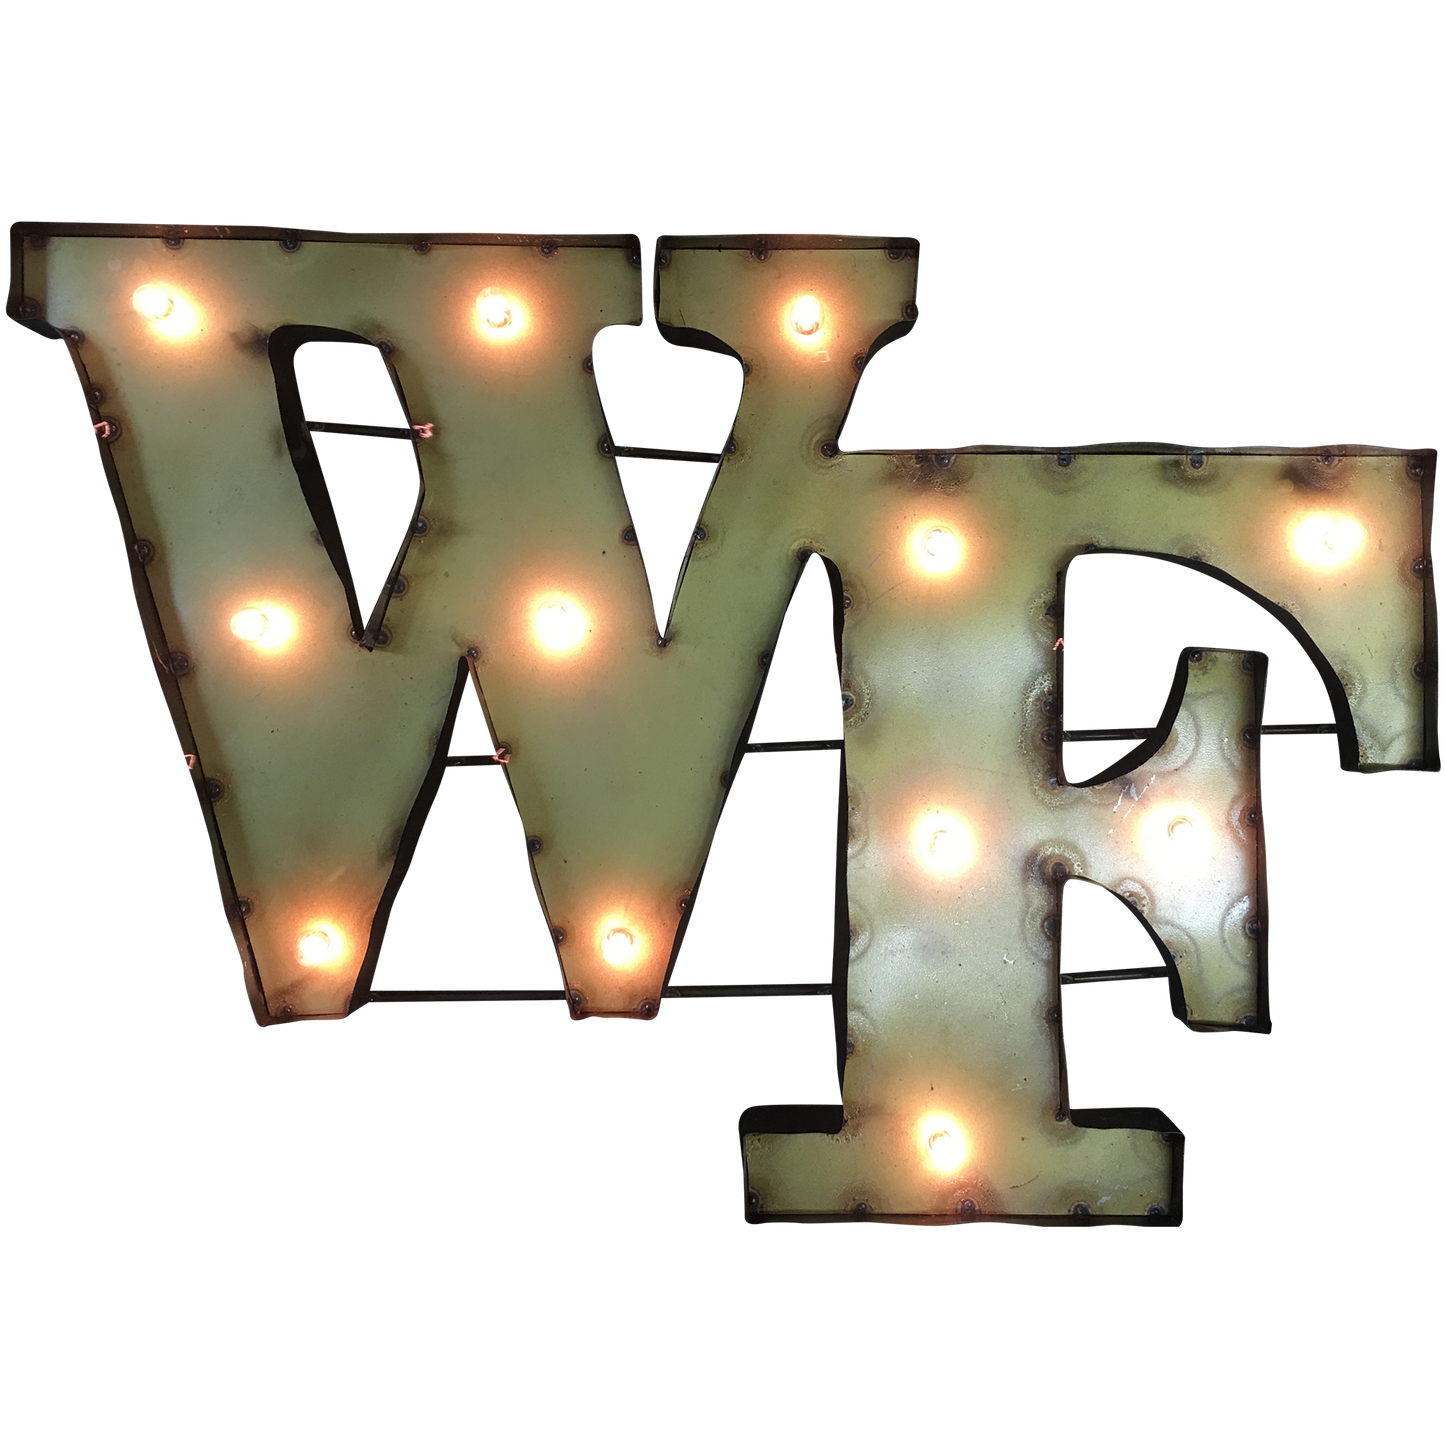 Wake Forest "WF" Lighted Recycled Metal Wall Decor